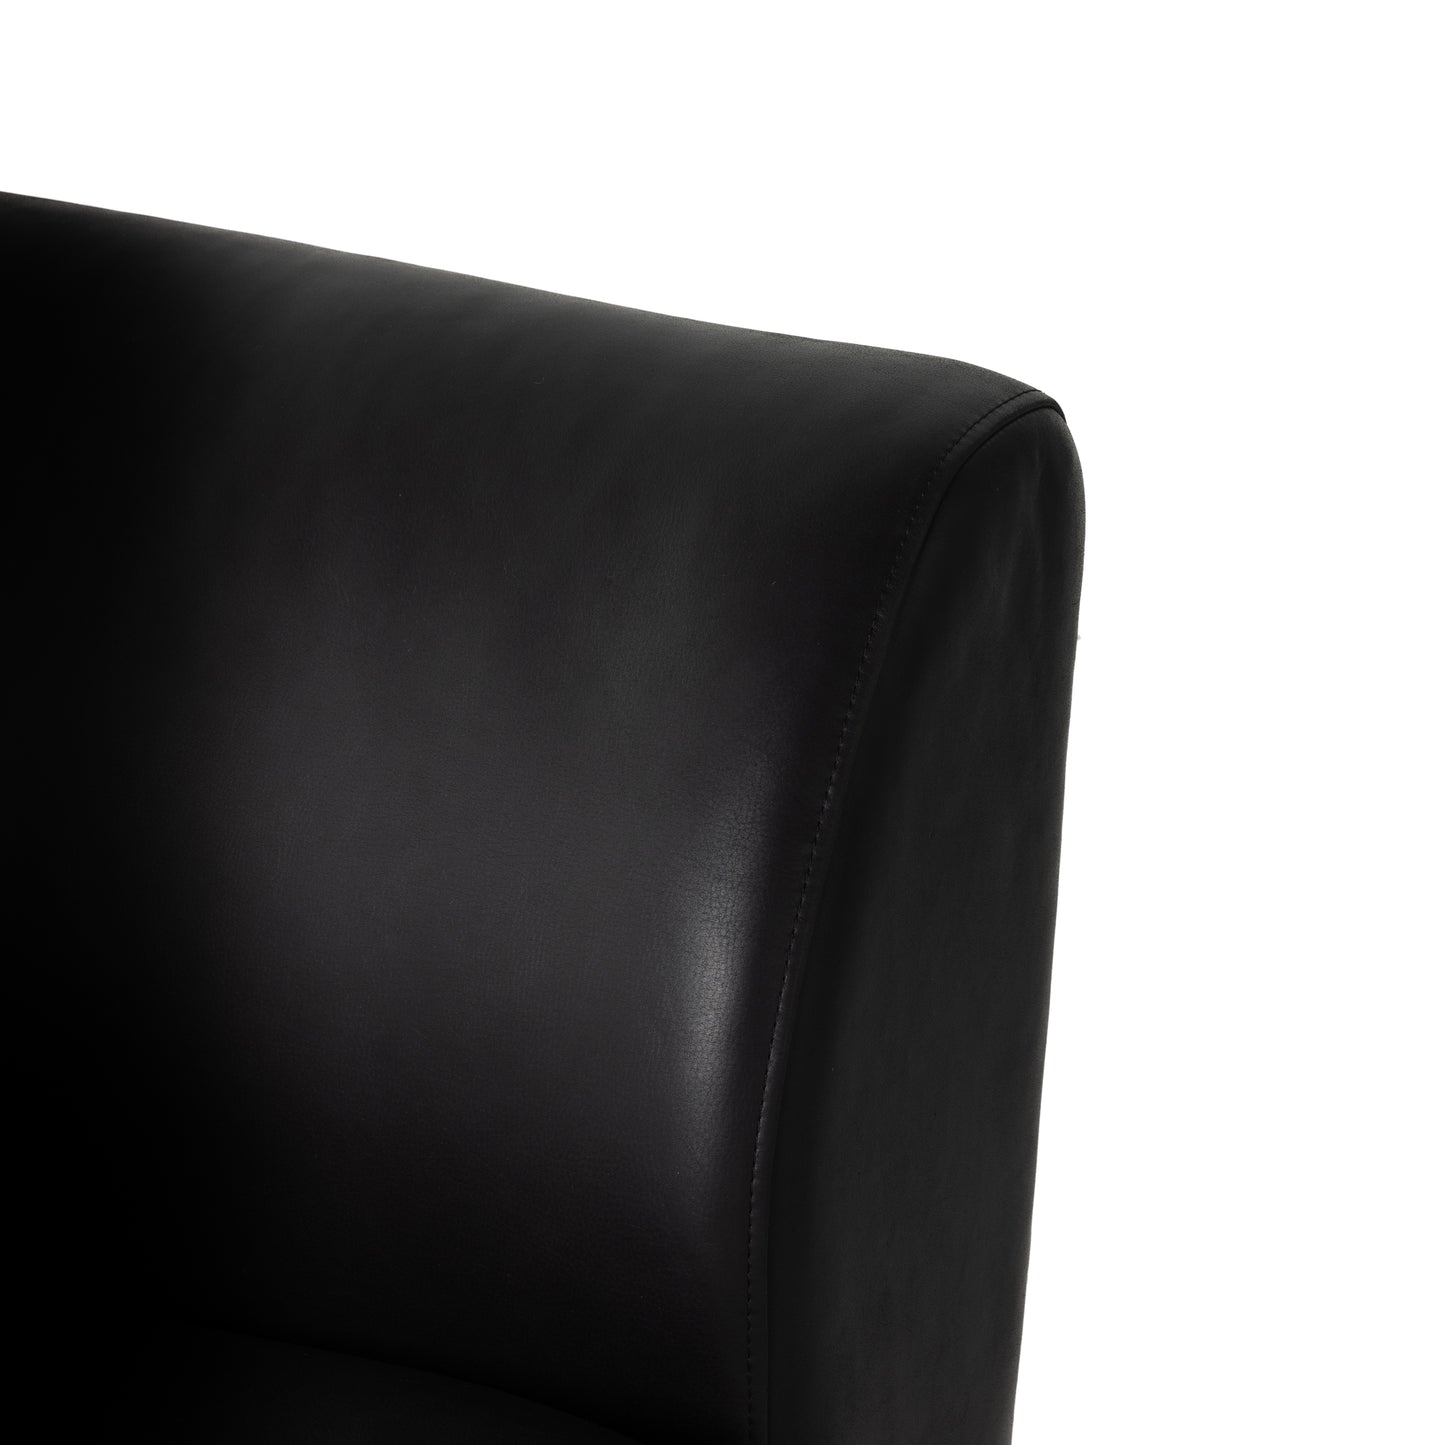 four hands siedell swivel chair black top